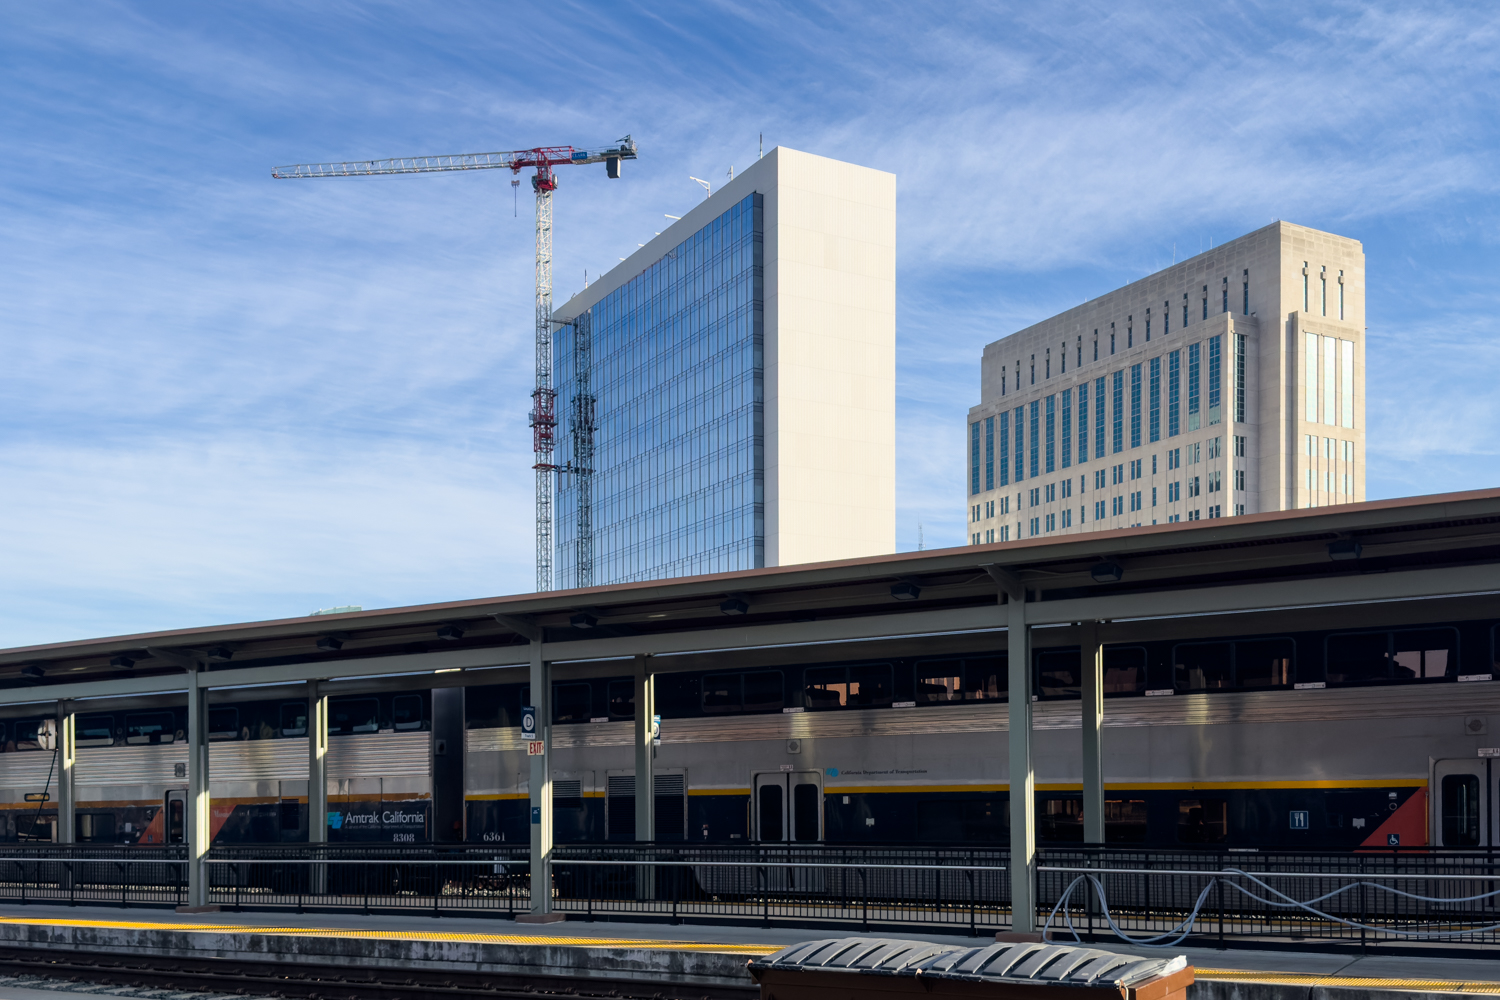 Sacramento Courthouse Building seen from Valley Station platform, image by author